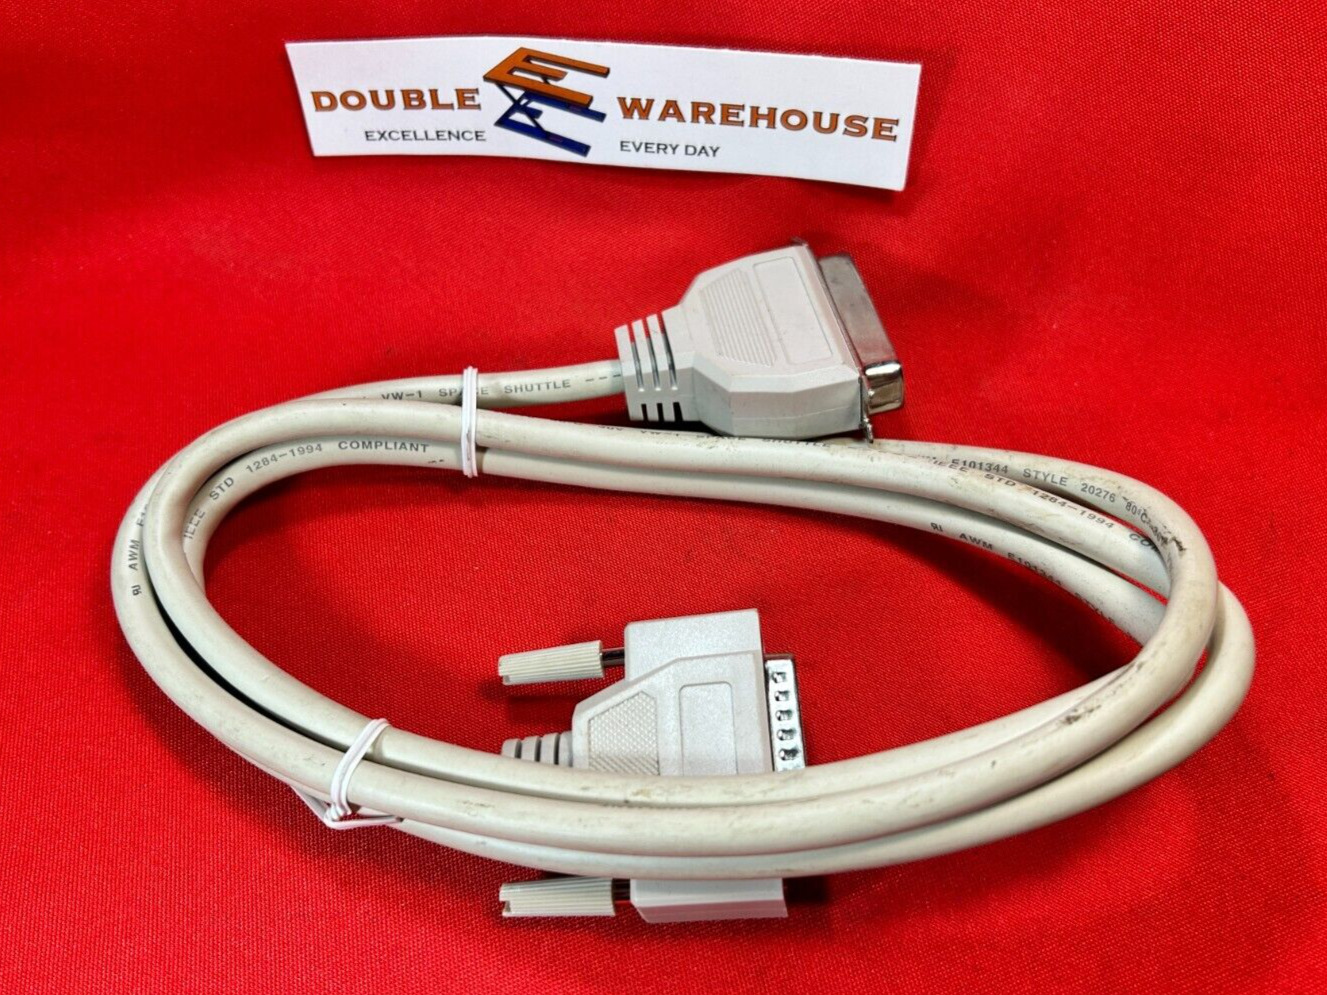 NOS Vintage Computer Cable IEEE STD 1284-1994 Compliant, Style 20276, E101344